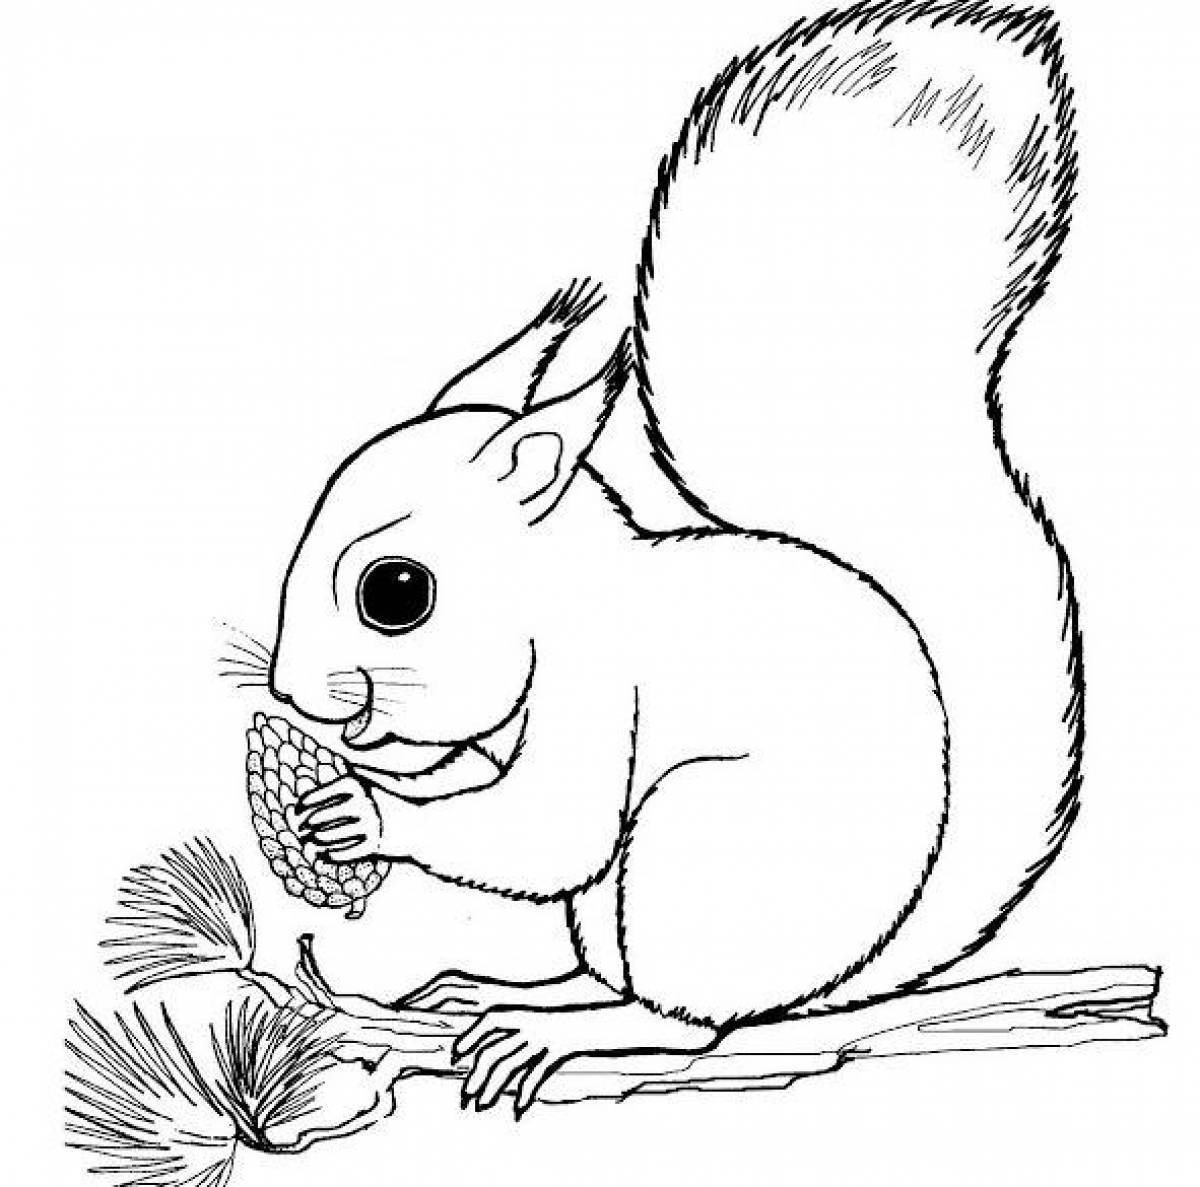 Squirrel live coloring for children 3-4 years old